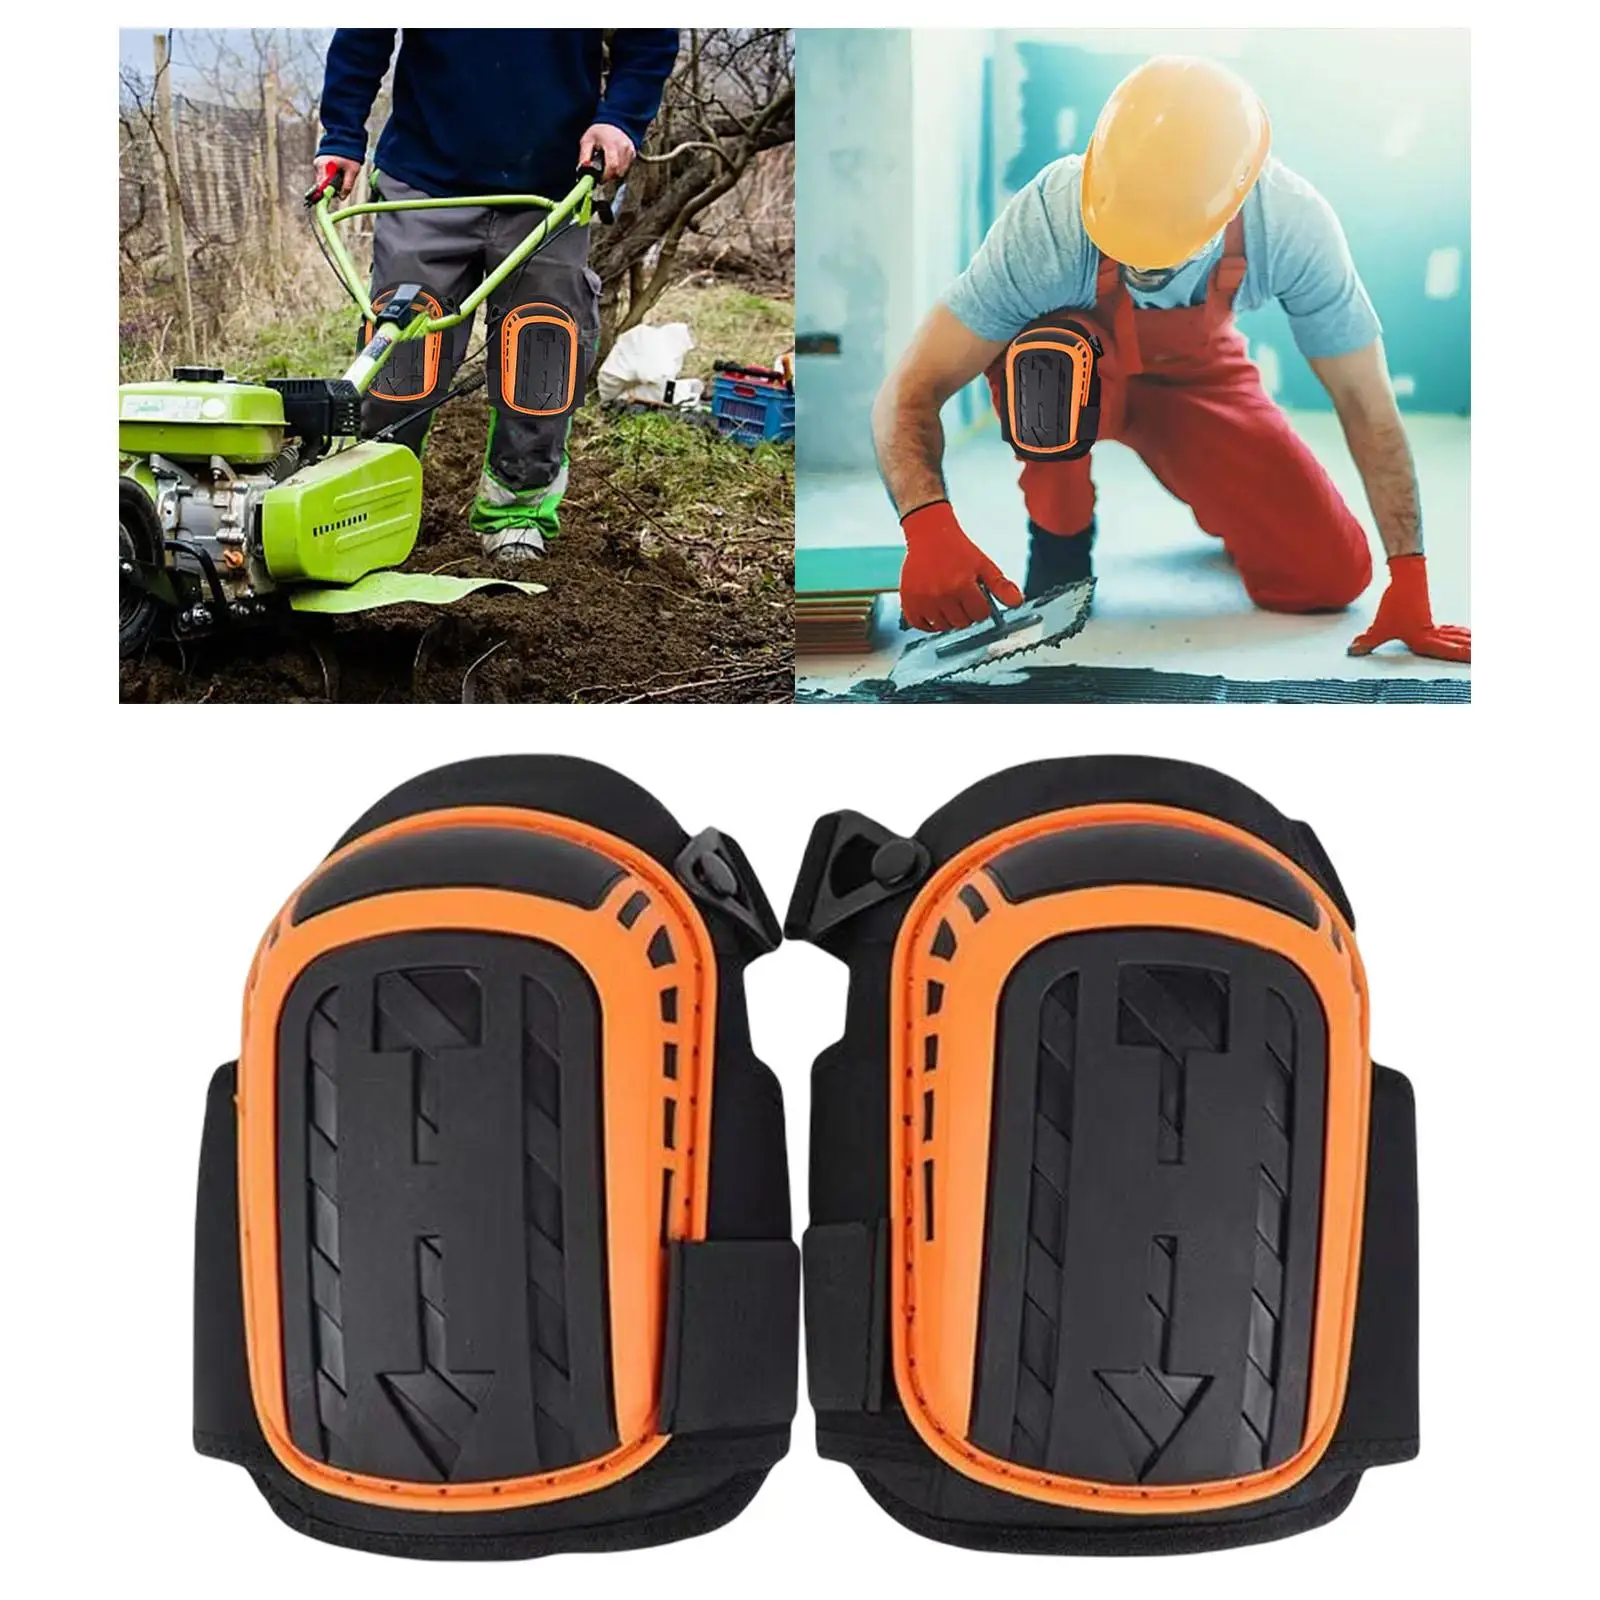 Knee Pads 2x Protector Knee Pads for Work Comfortable Heavy Duty Comfortable Construction Tools Professional for Skating Working